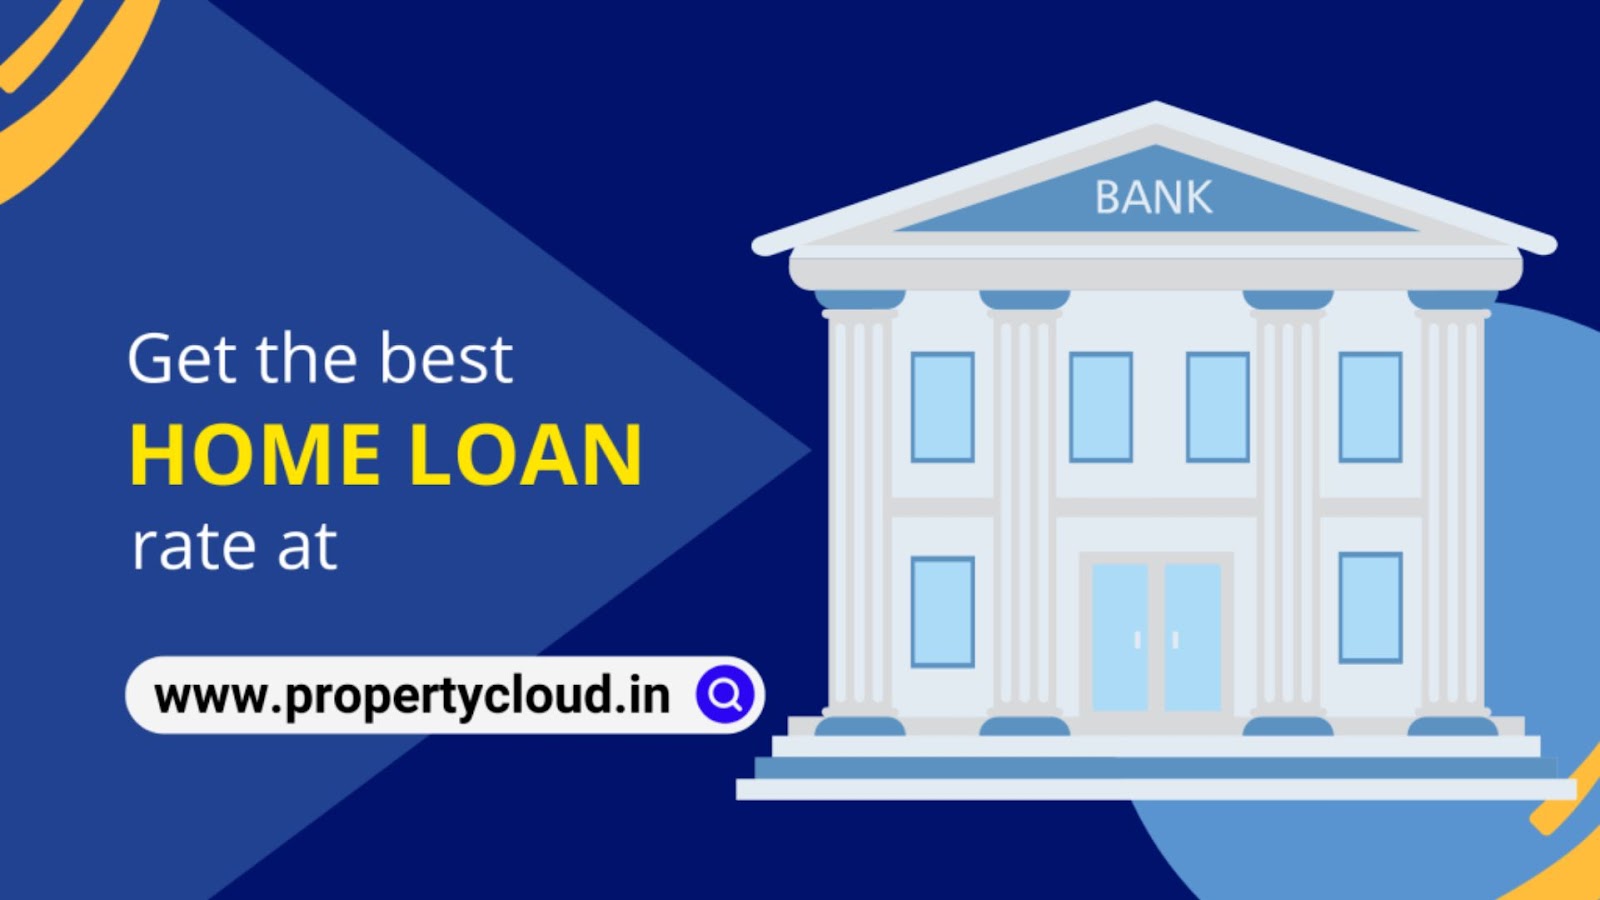 Contact a home loan expert for the best rates at PropertyCloud.